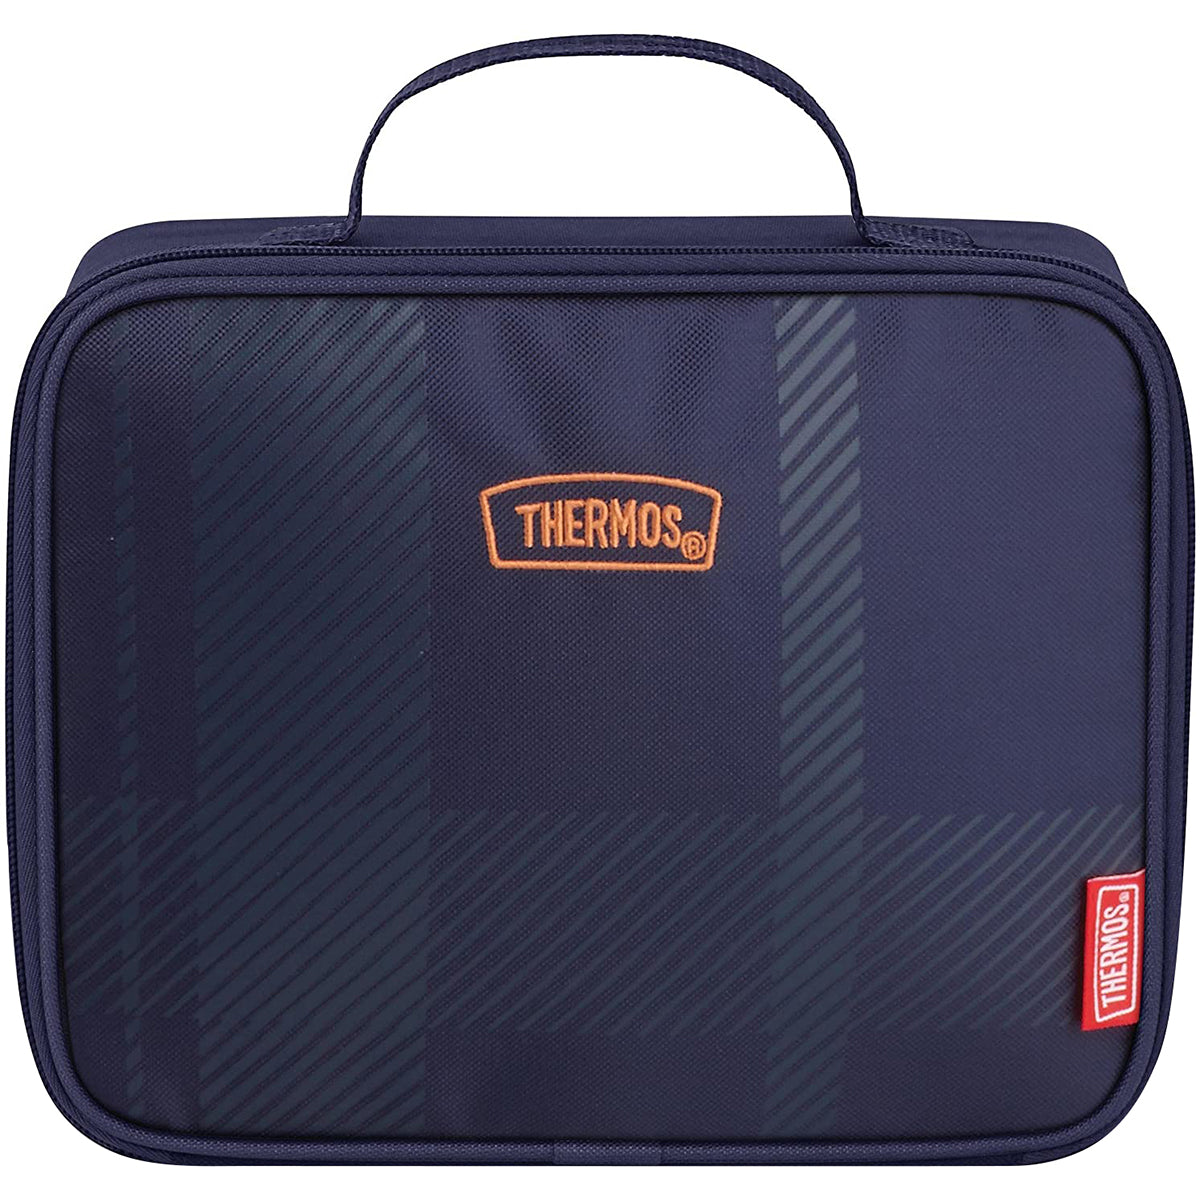 Thermos Standard Lunch Box - Navy Plaid Thermos